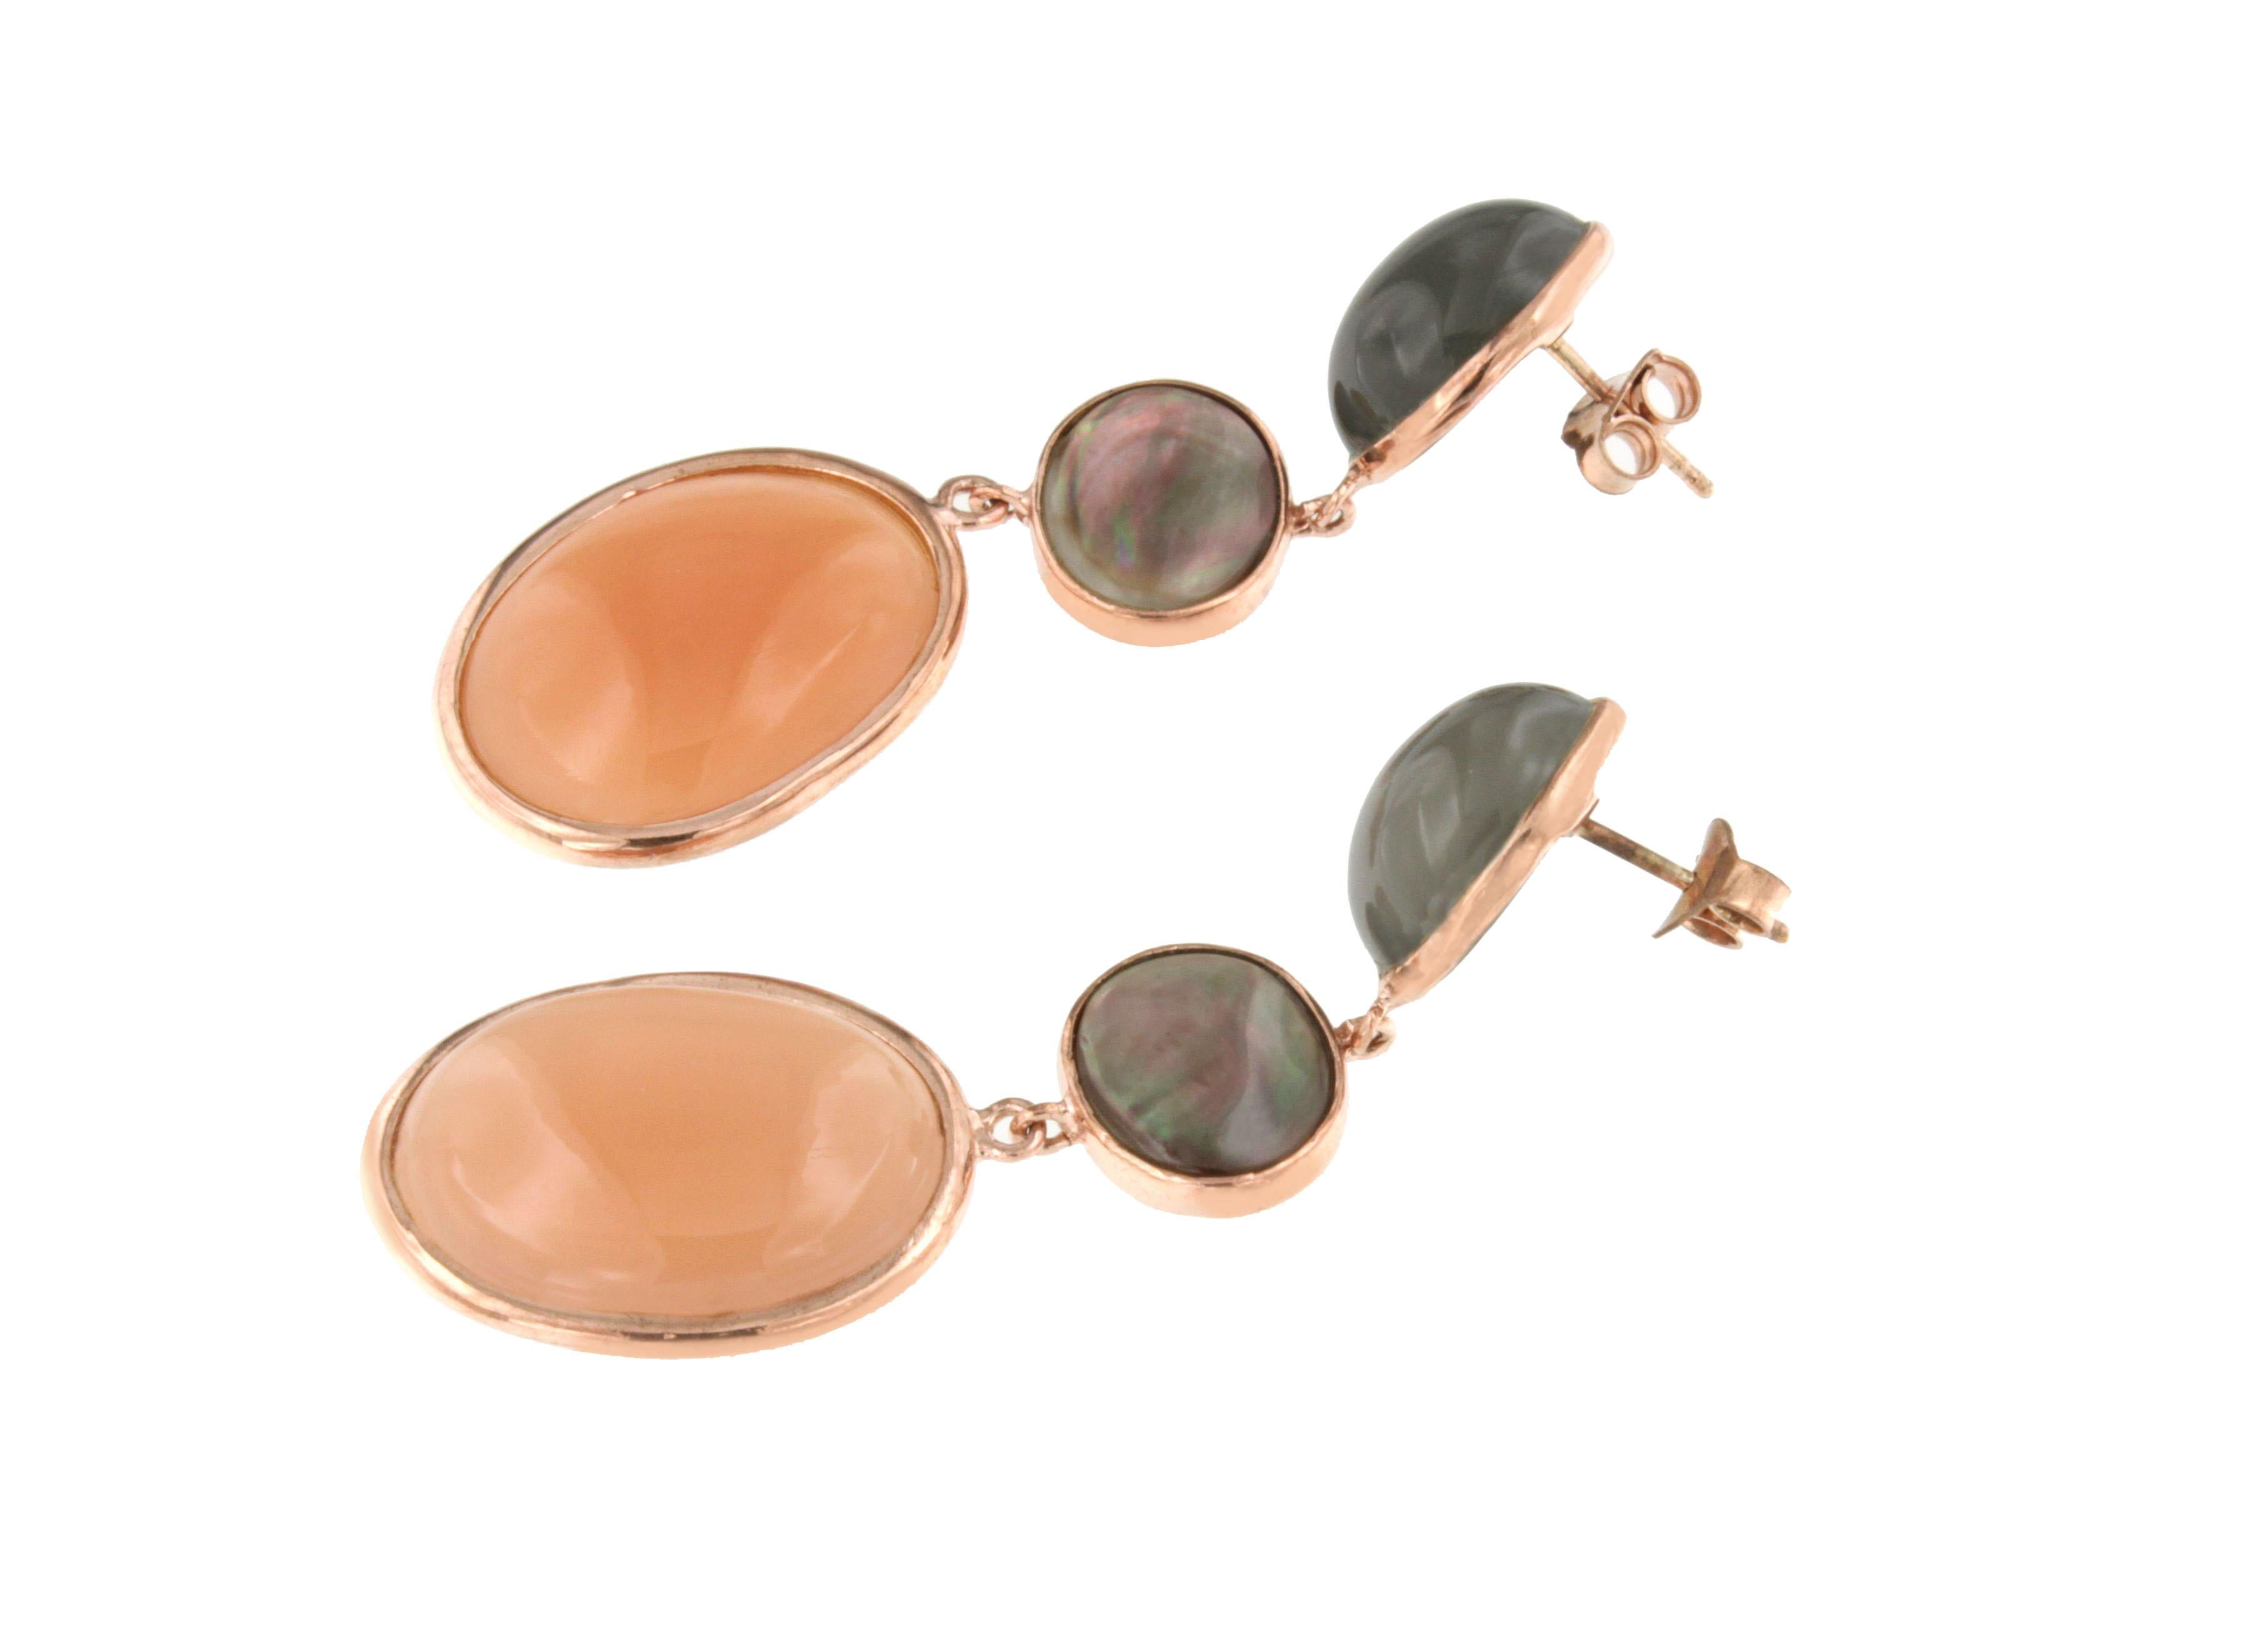 Earrings in rose gold 9 Karat with Grey Moonstone (oval cabochon cut, size: 10x14 mm), Black Mother of Pearl (oval cabochon cut, size: 10x12 mm) and Peach Moonstone (oval cabochon cut, size: 15x20 mm)

All Stanoppi Jewelry is new and has never been